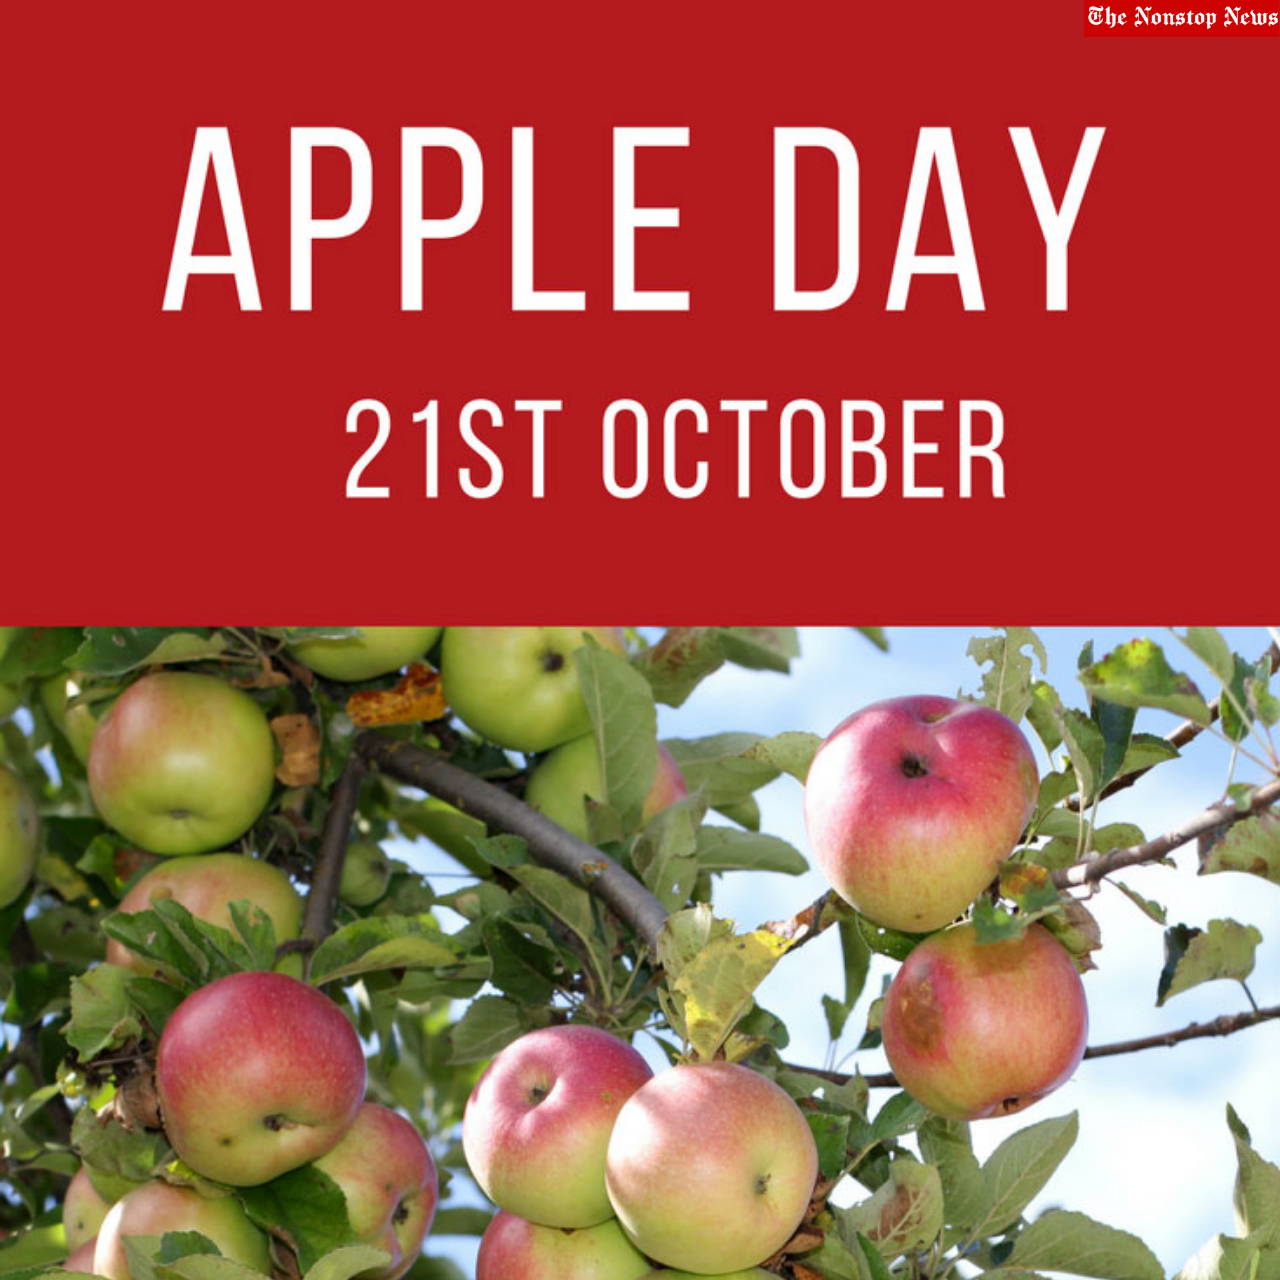 National Apple Day (US) 2021 Wishes, HD Images, Quotes, Stickers, and